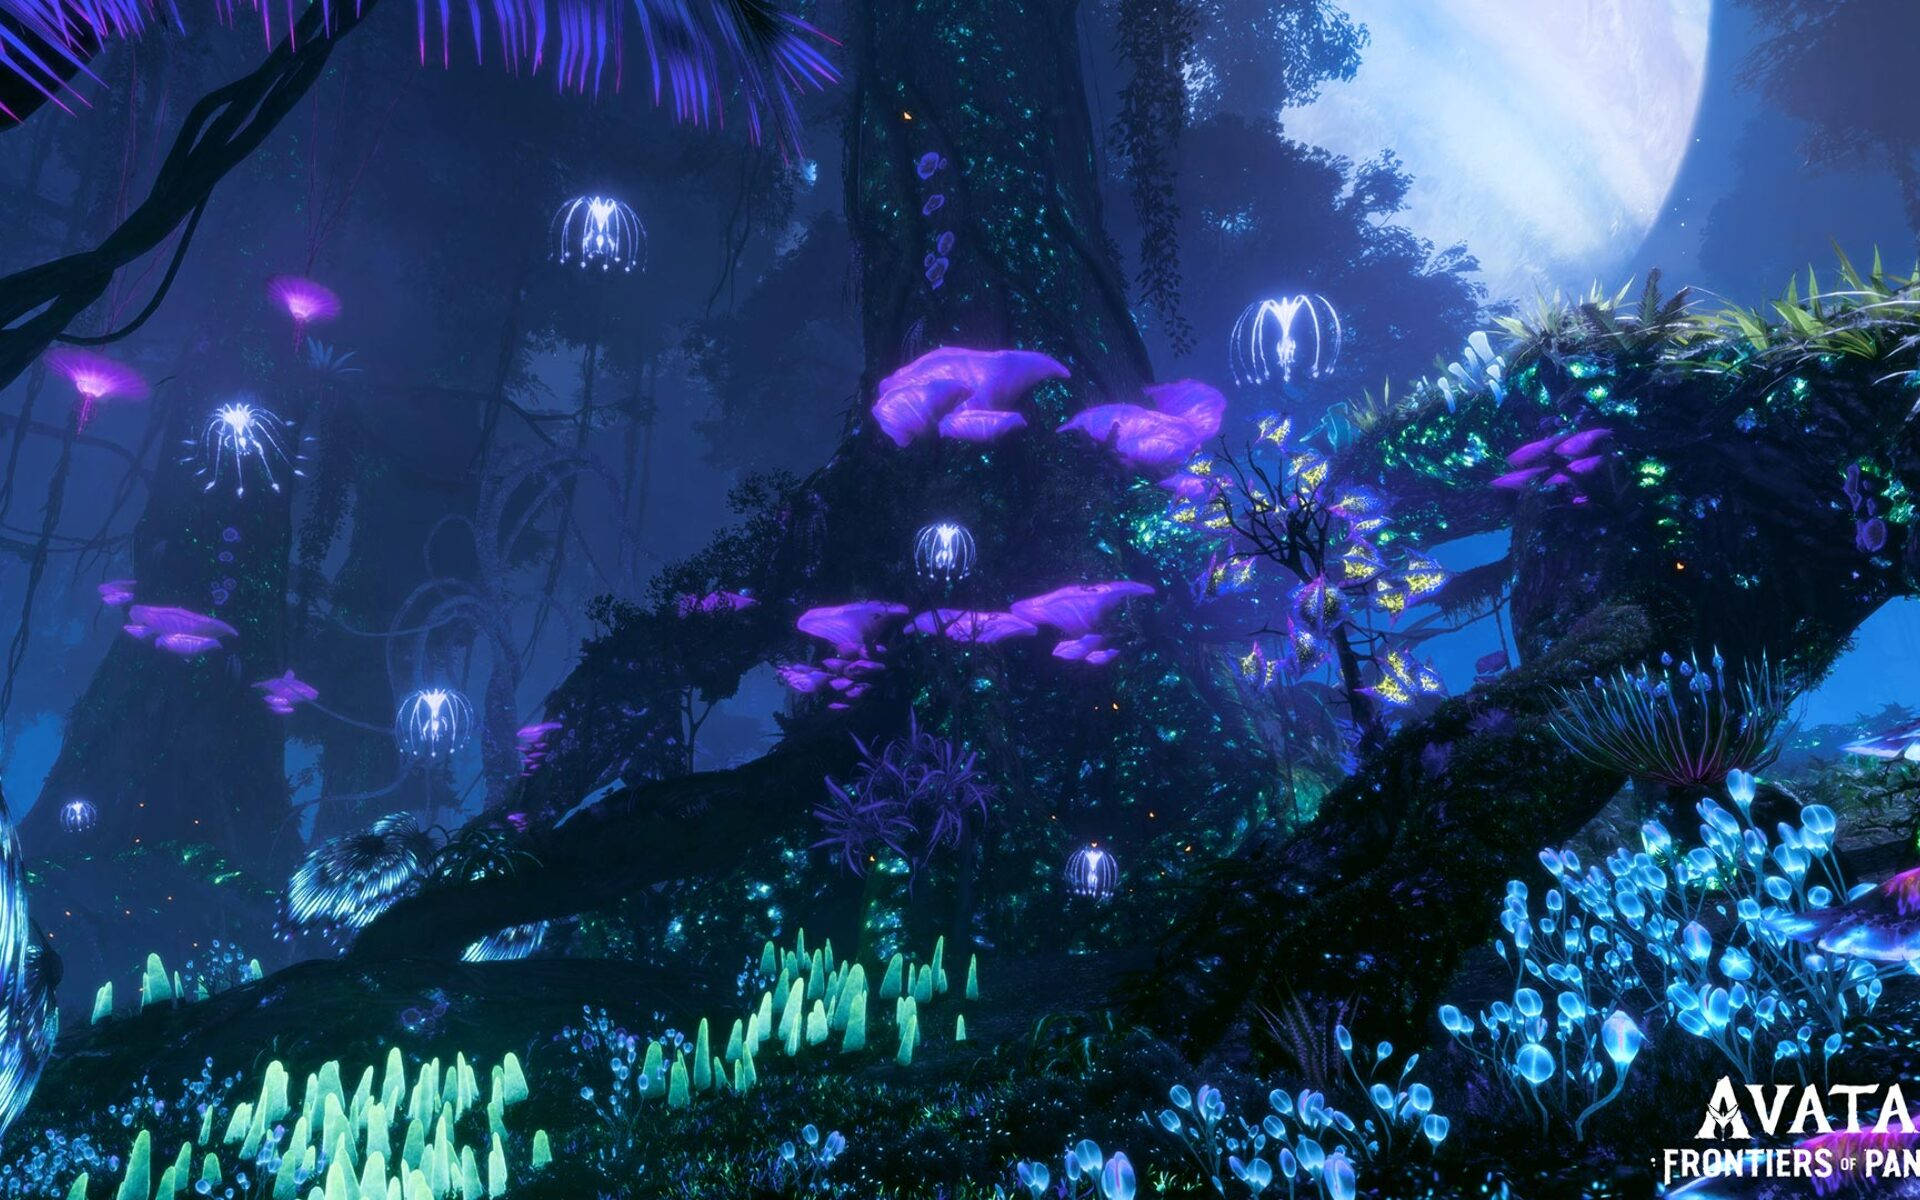 Disney unveils first renderings of Avatar land